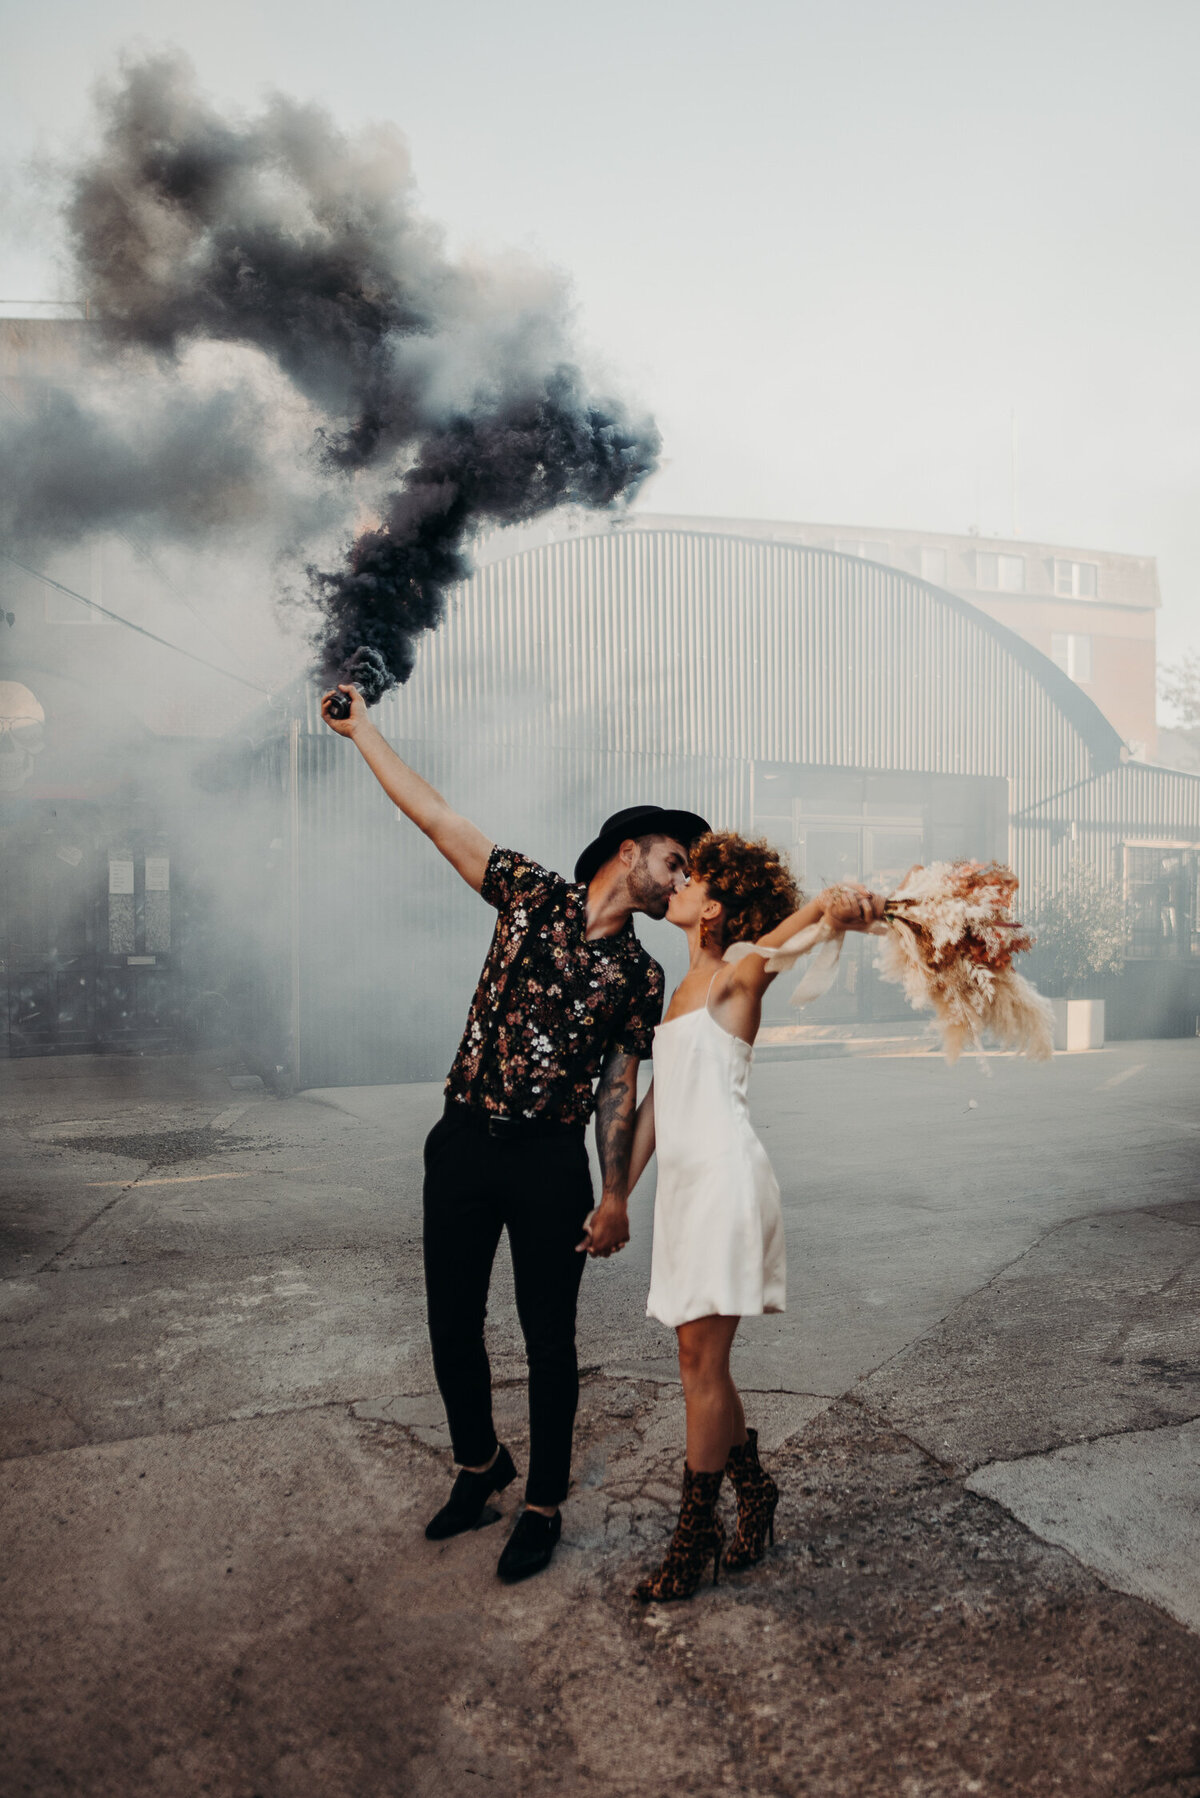 A couple light a smoke grenade of The Shack Revolution on their weddings day.